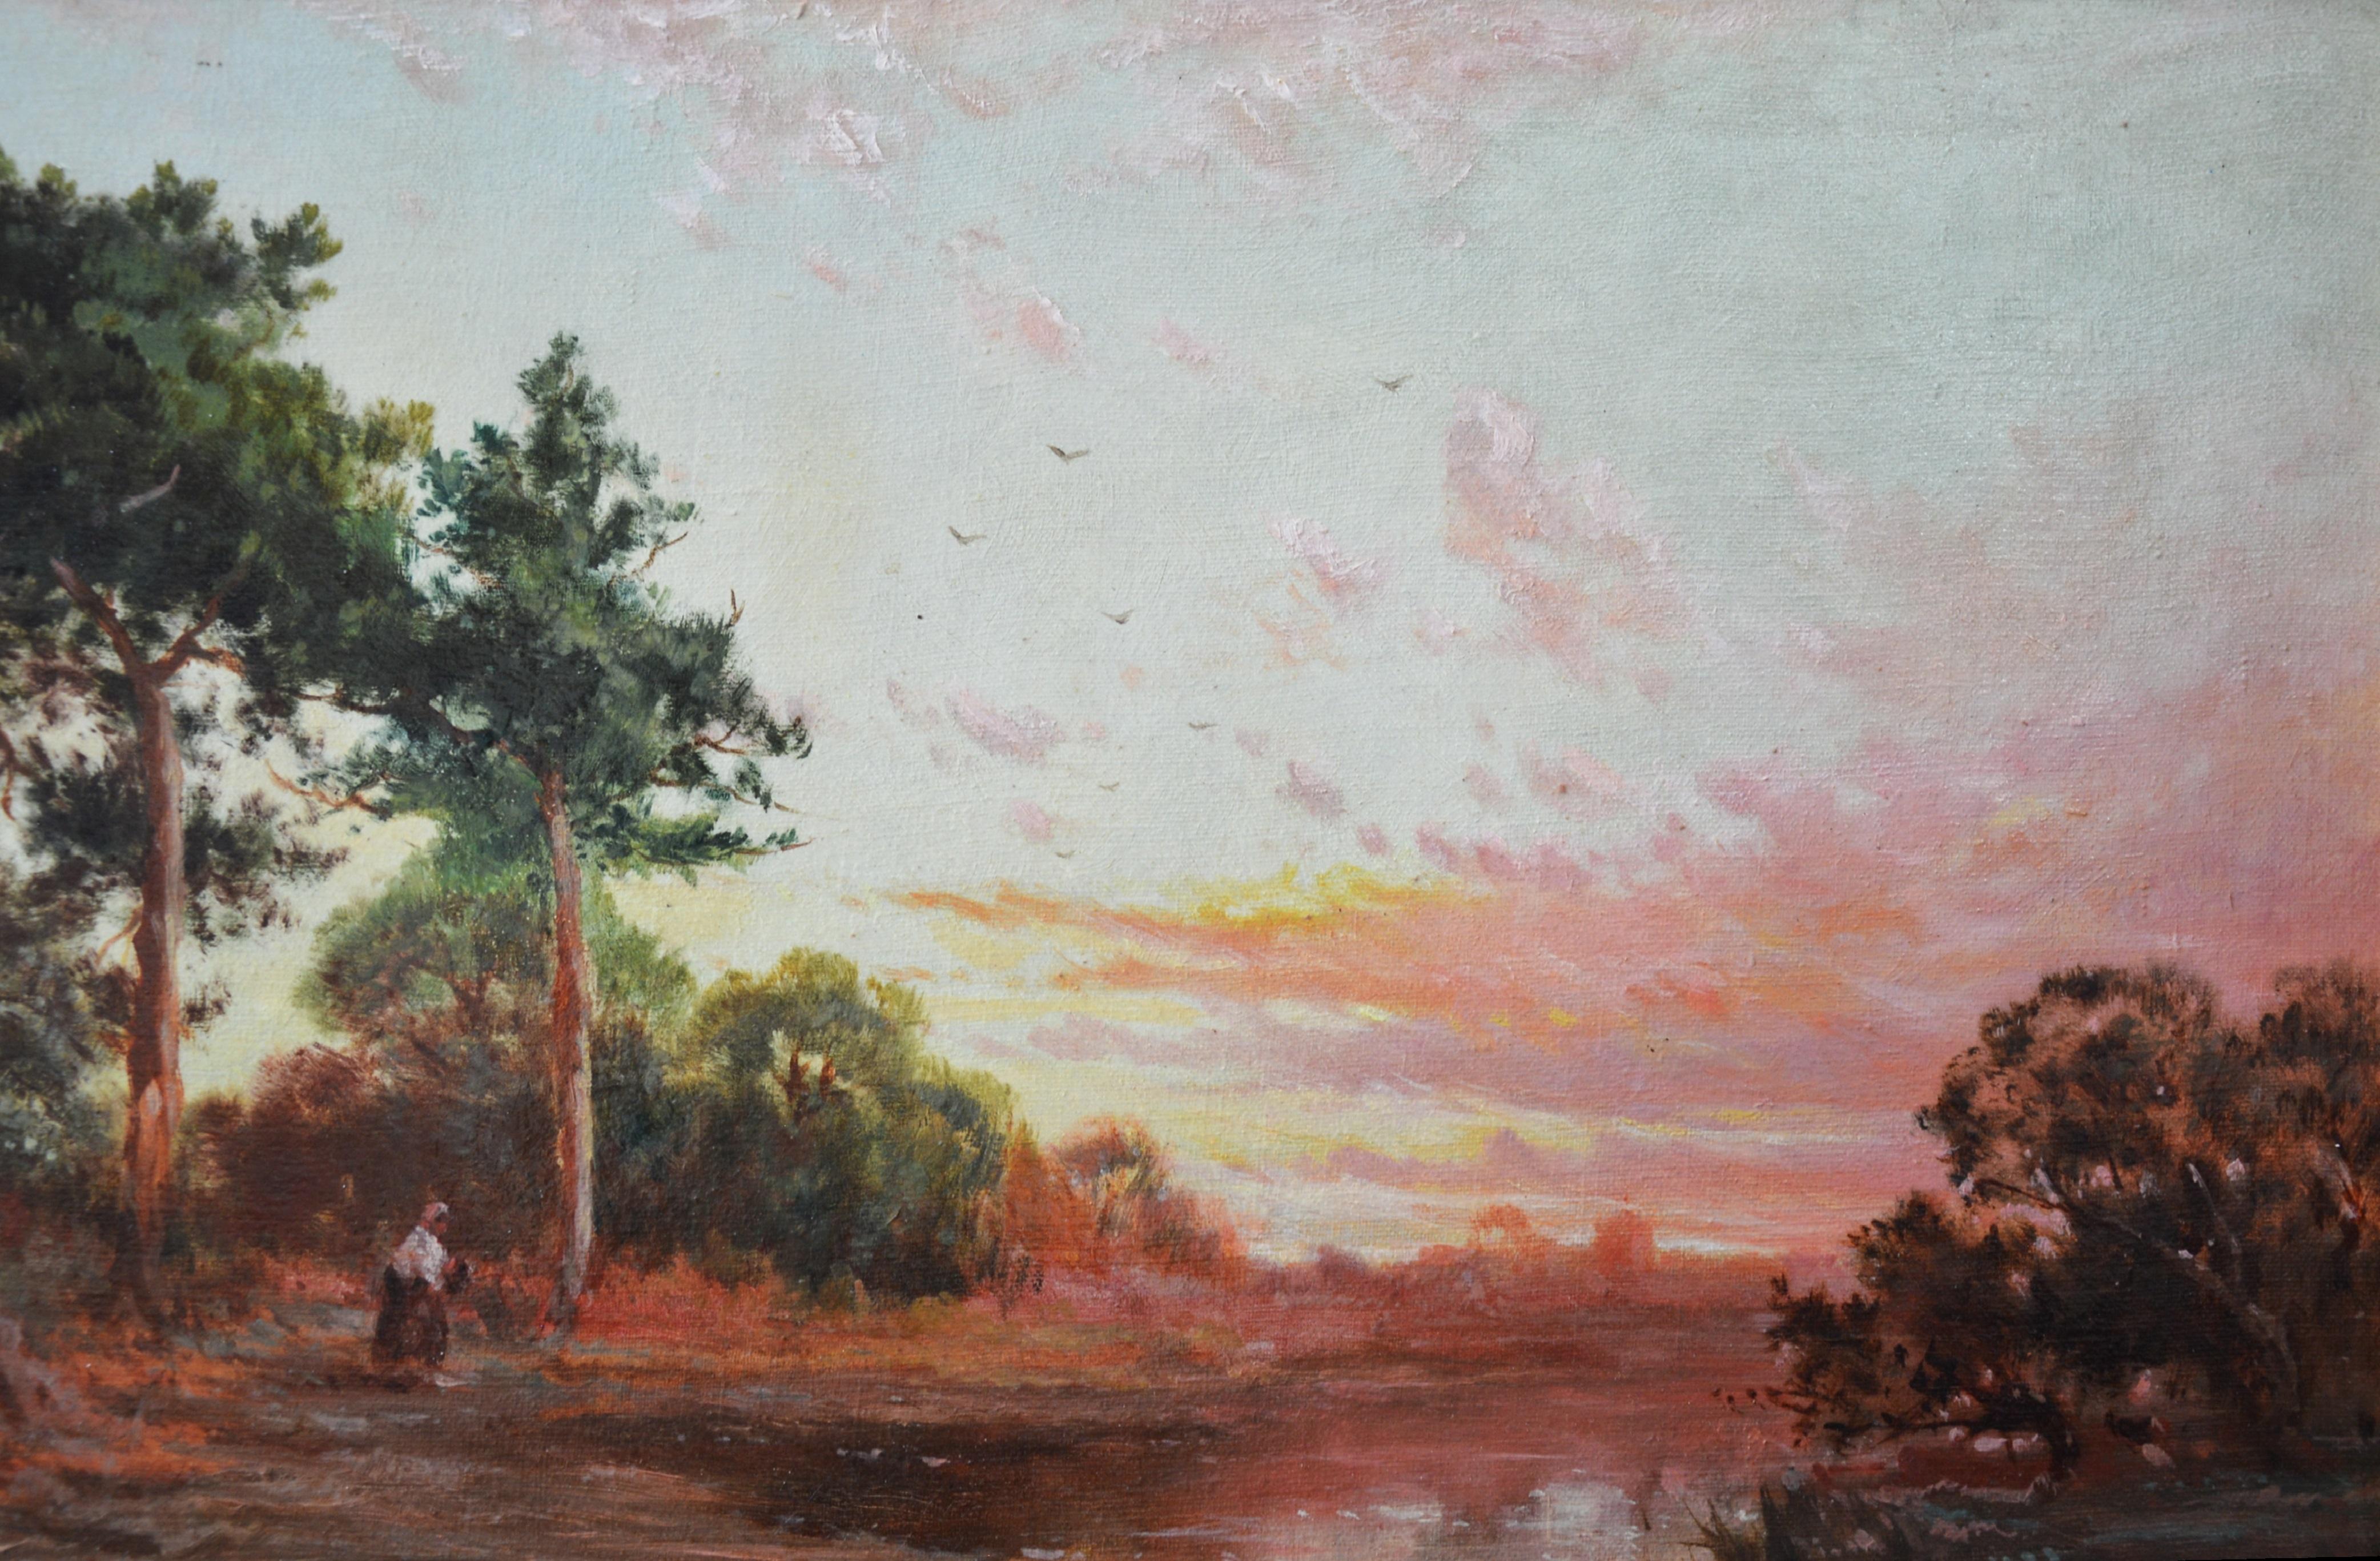 Sonning on Thames - 19th Century Sunset River Landscape Oil Painting  1